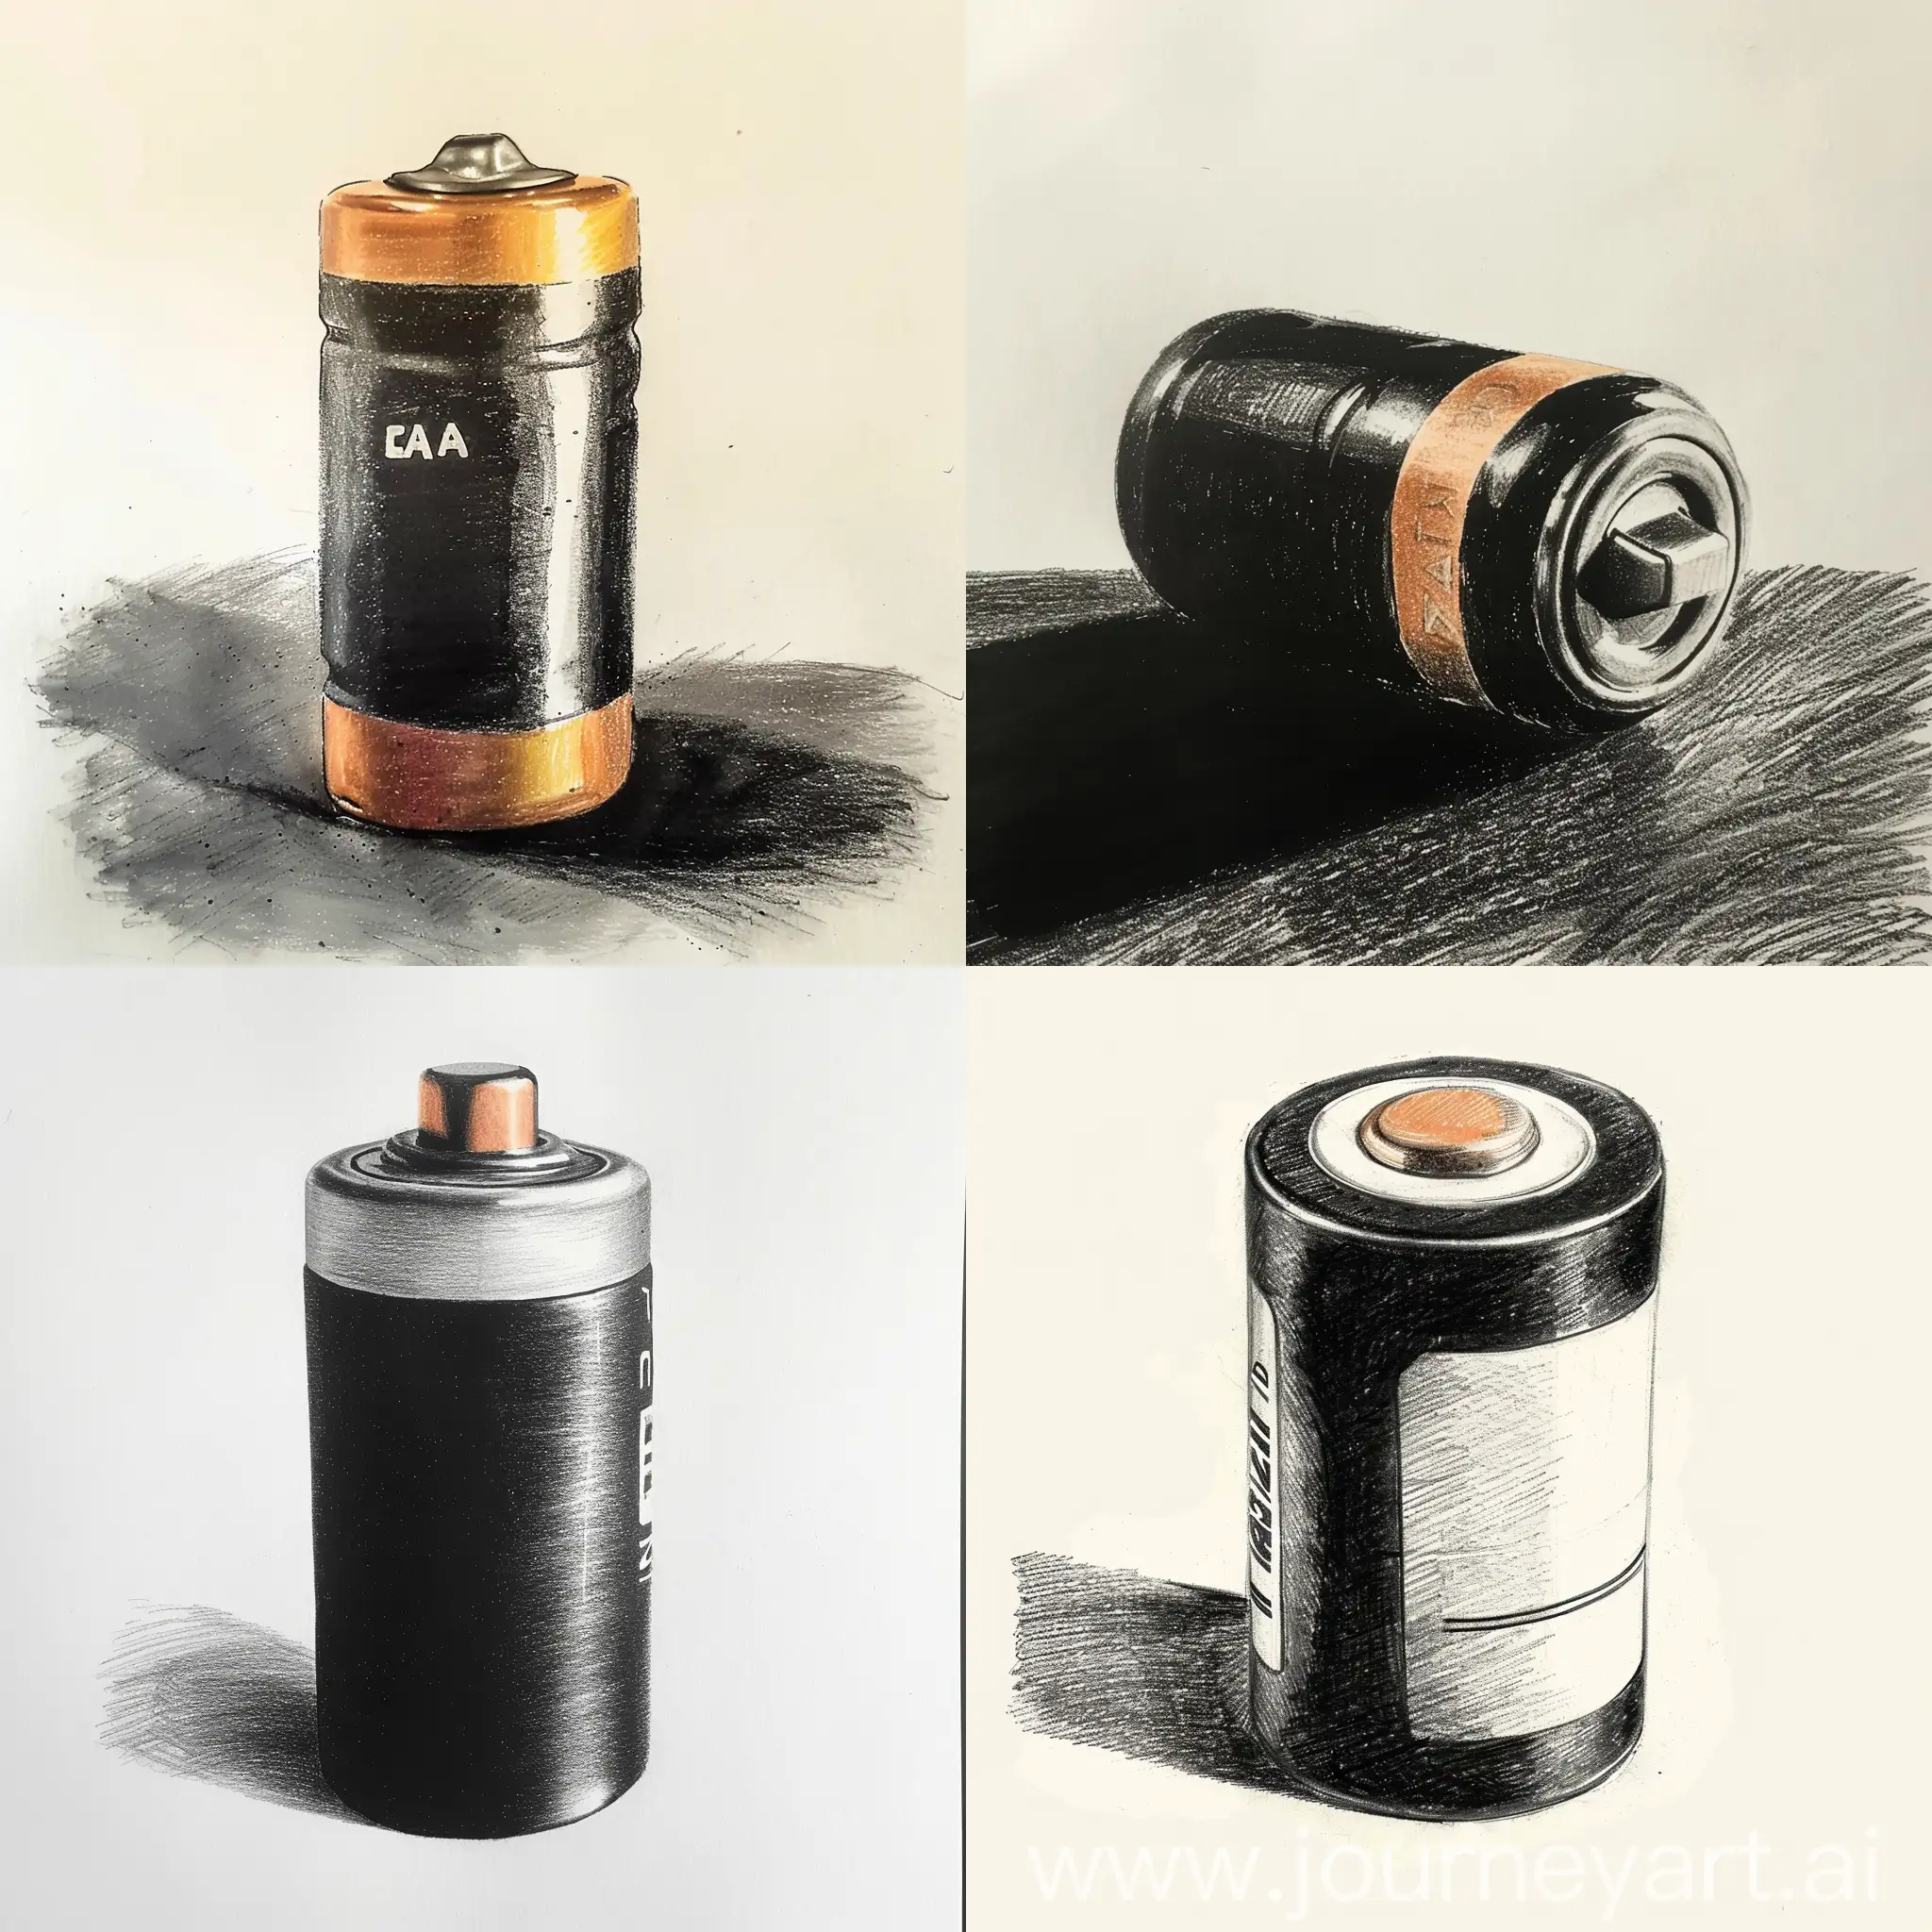 Childs-HandDrawn-AA-Battery-Sketch